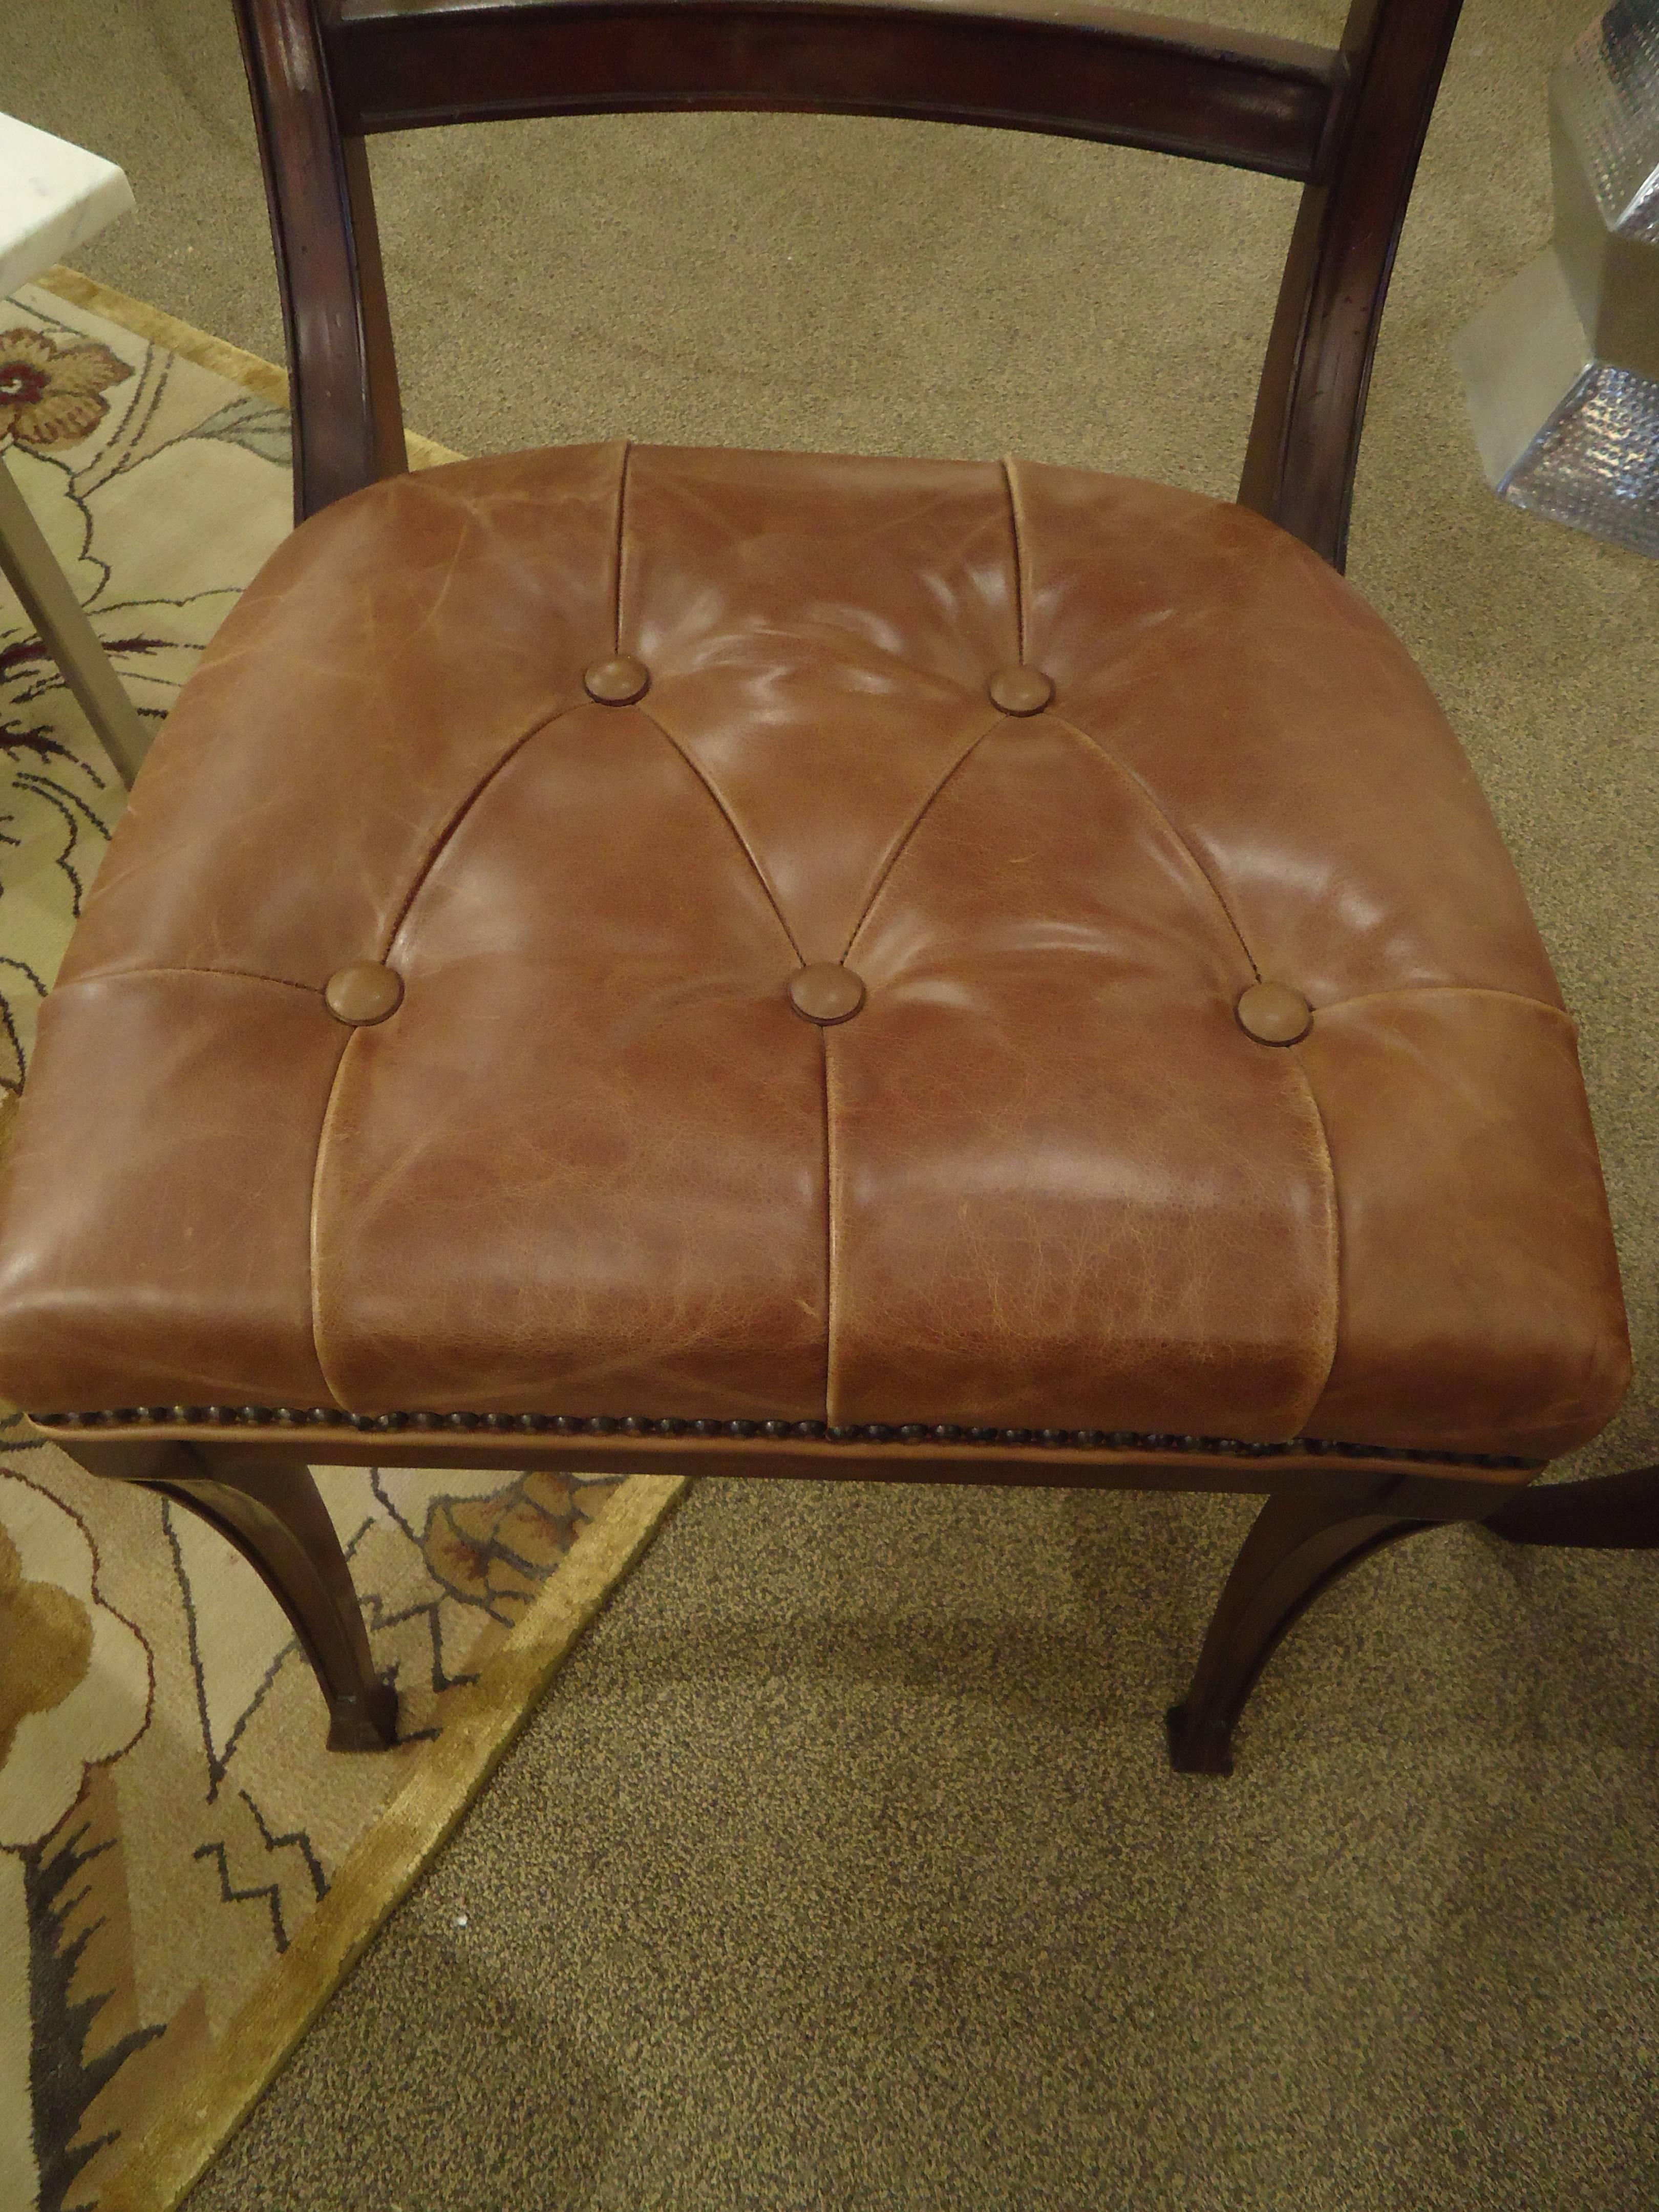 Four beautifully designed elegant side chairs/dining chairs with distressed leather button tufted seats and brass nailhead detailing and rich dark mahogany frames. Henredon label underside.
Measures: Seat width 20